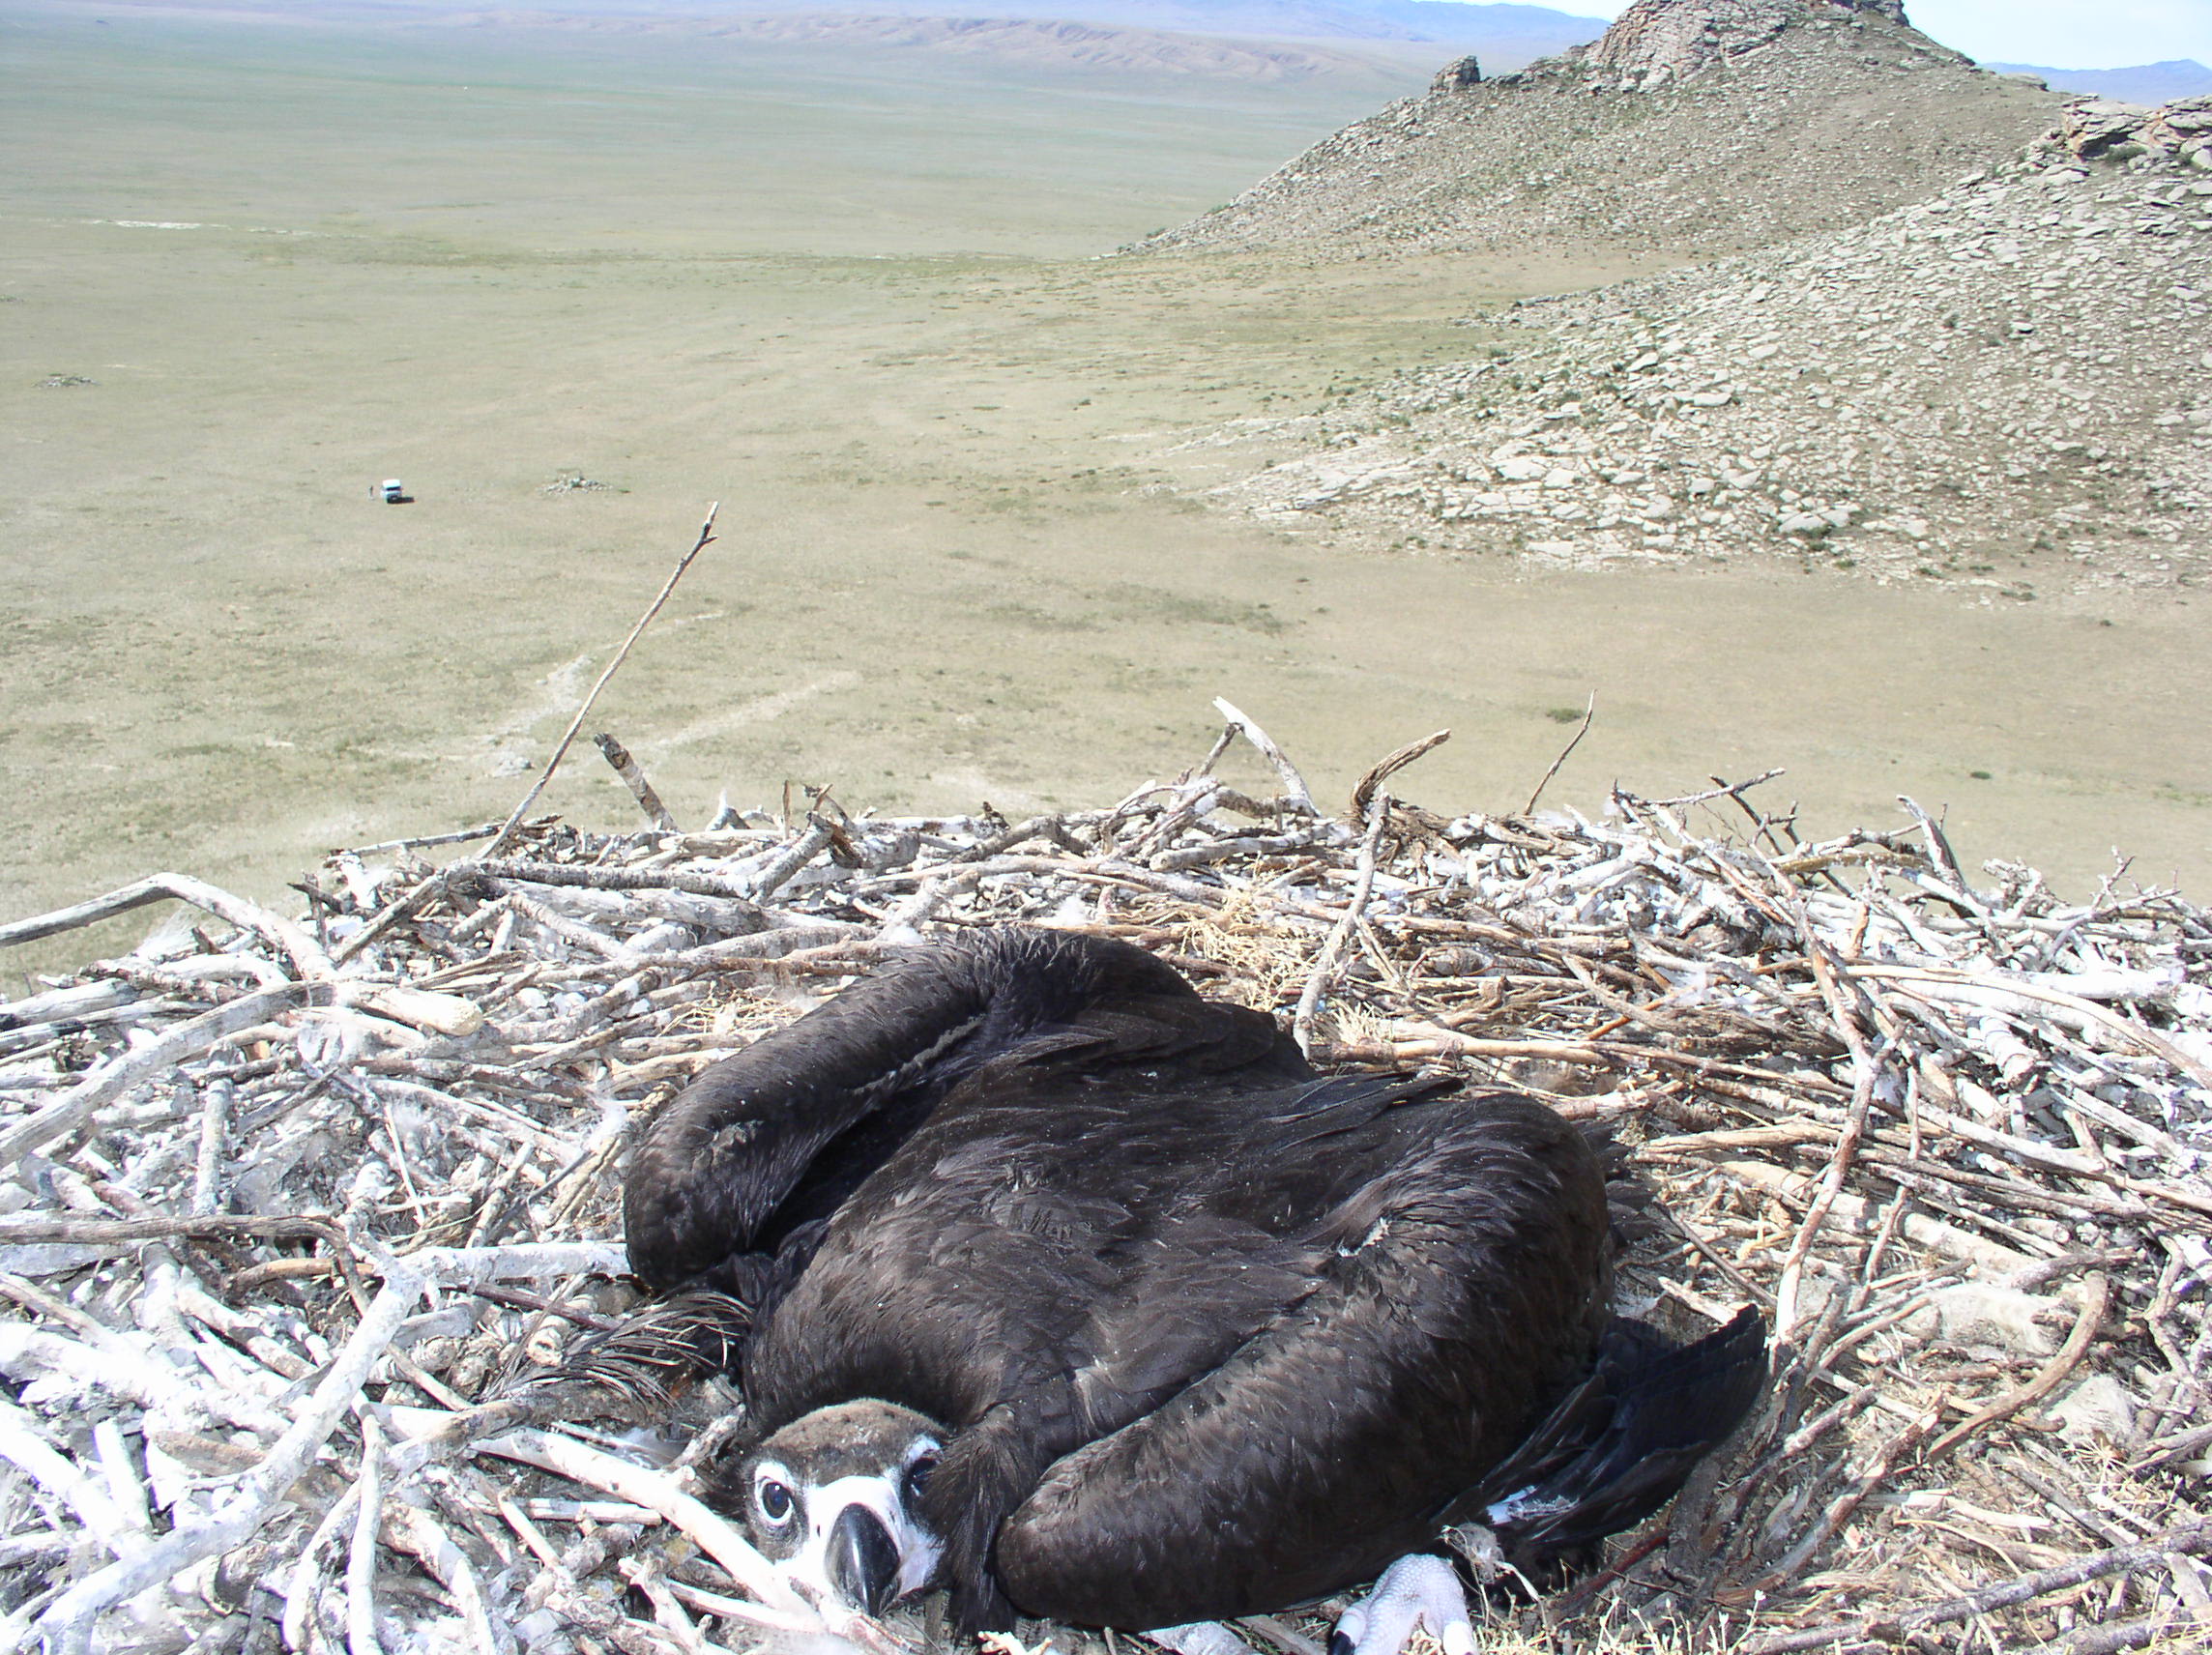 A vulture protecting its nest